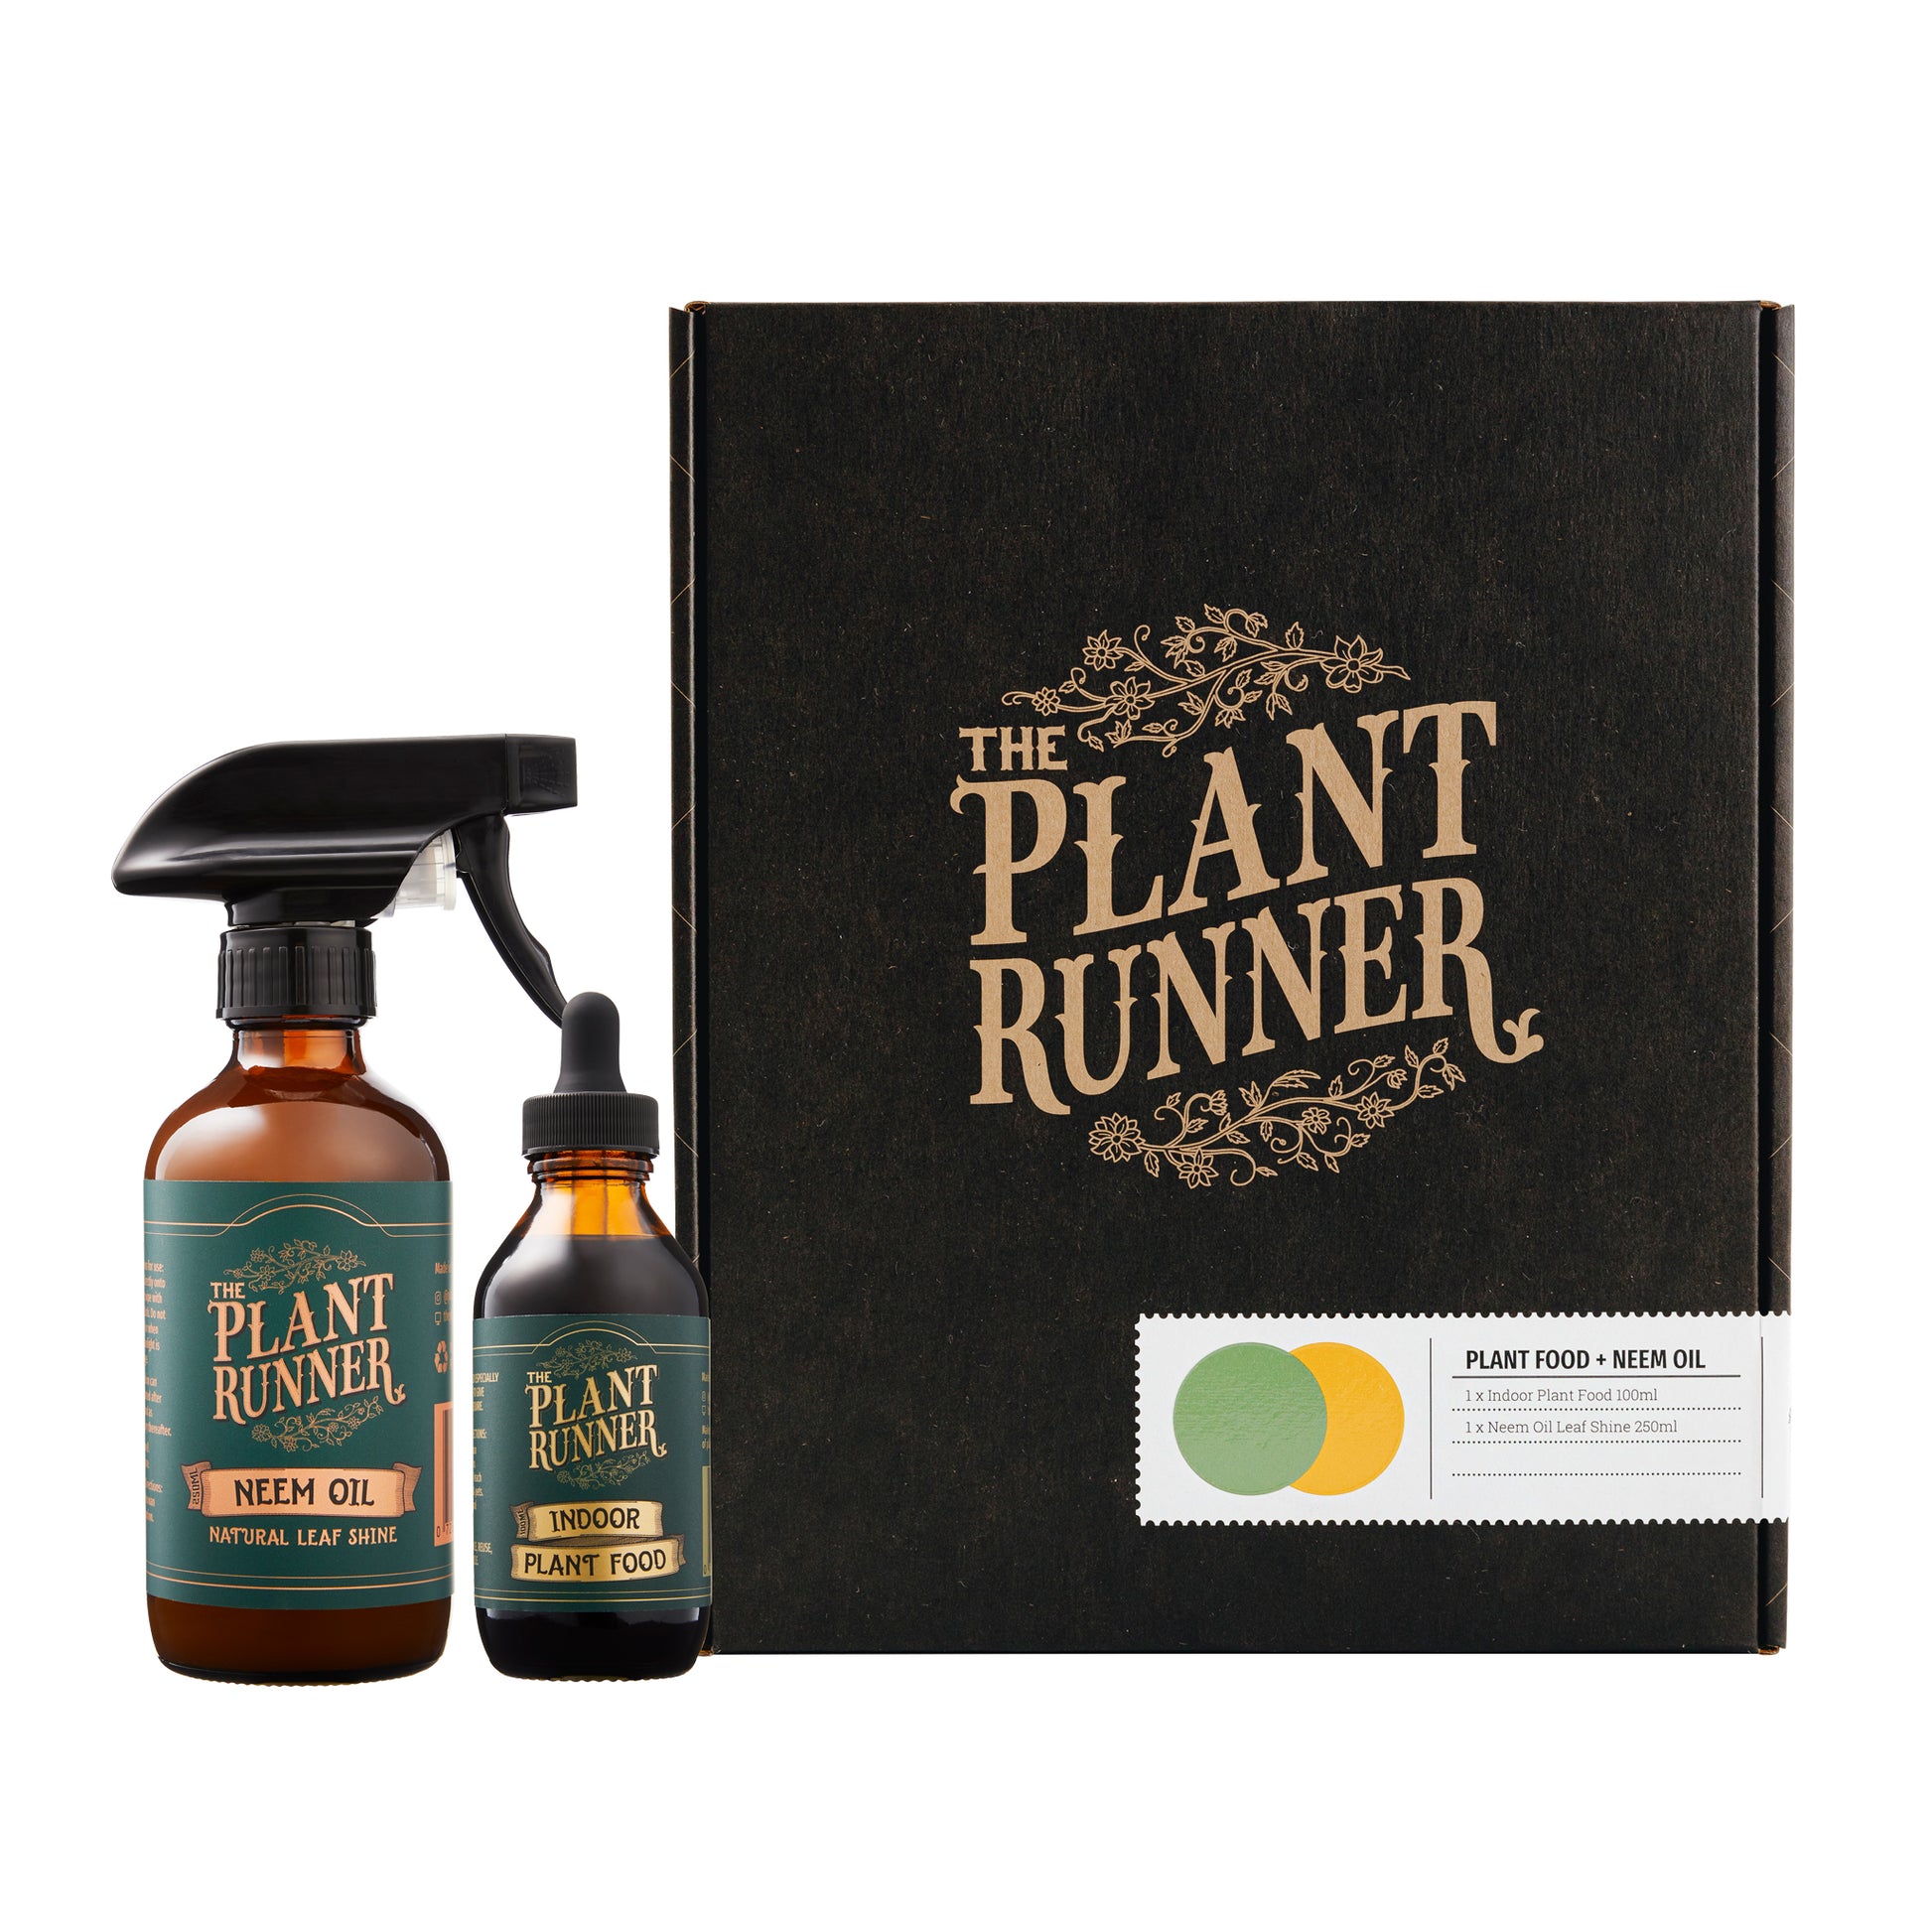 The Plant Runner's Indoor Plant Food and Neem Oil Leaf Shine are now available as a team, housed in a beautiful bespoke gift box.